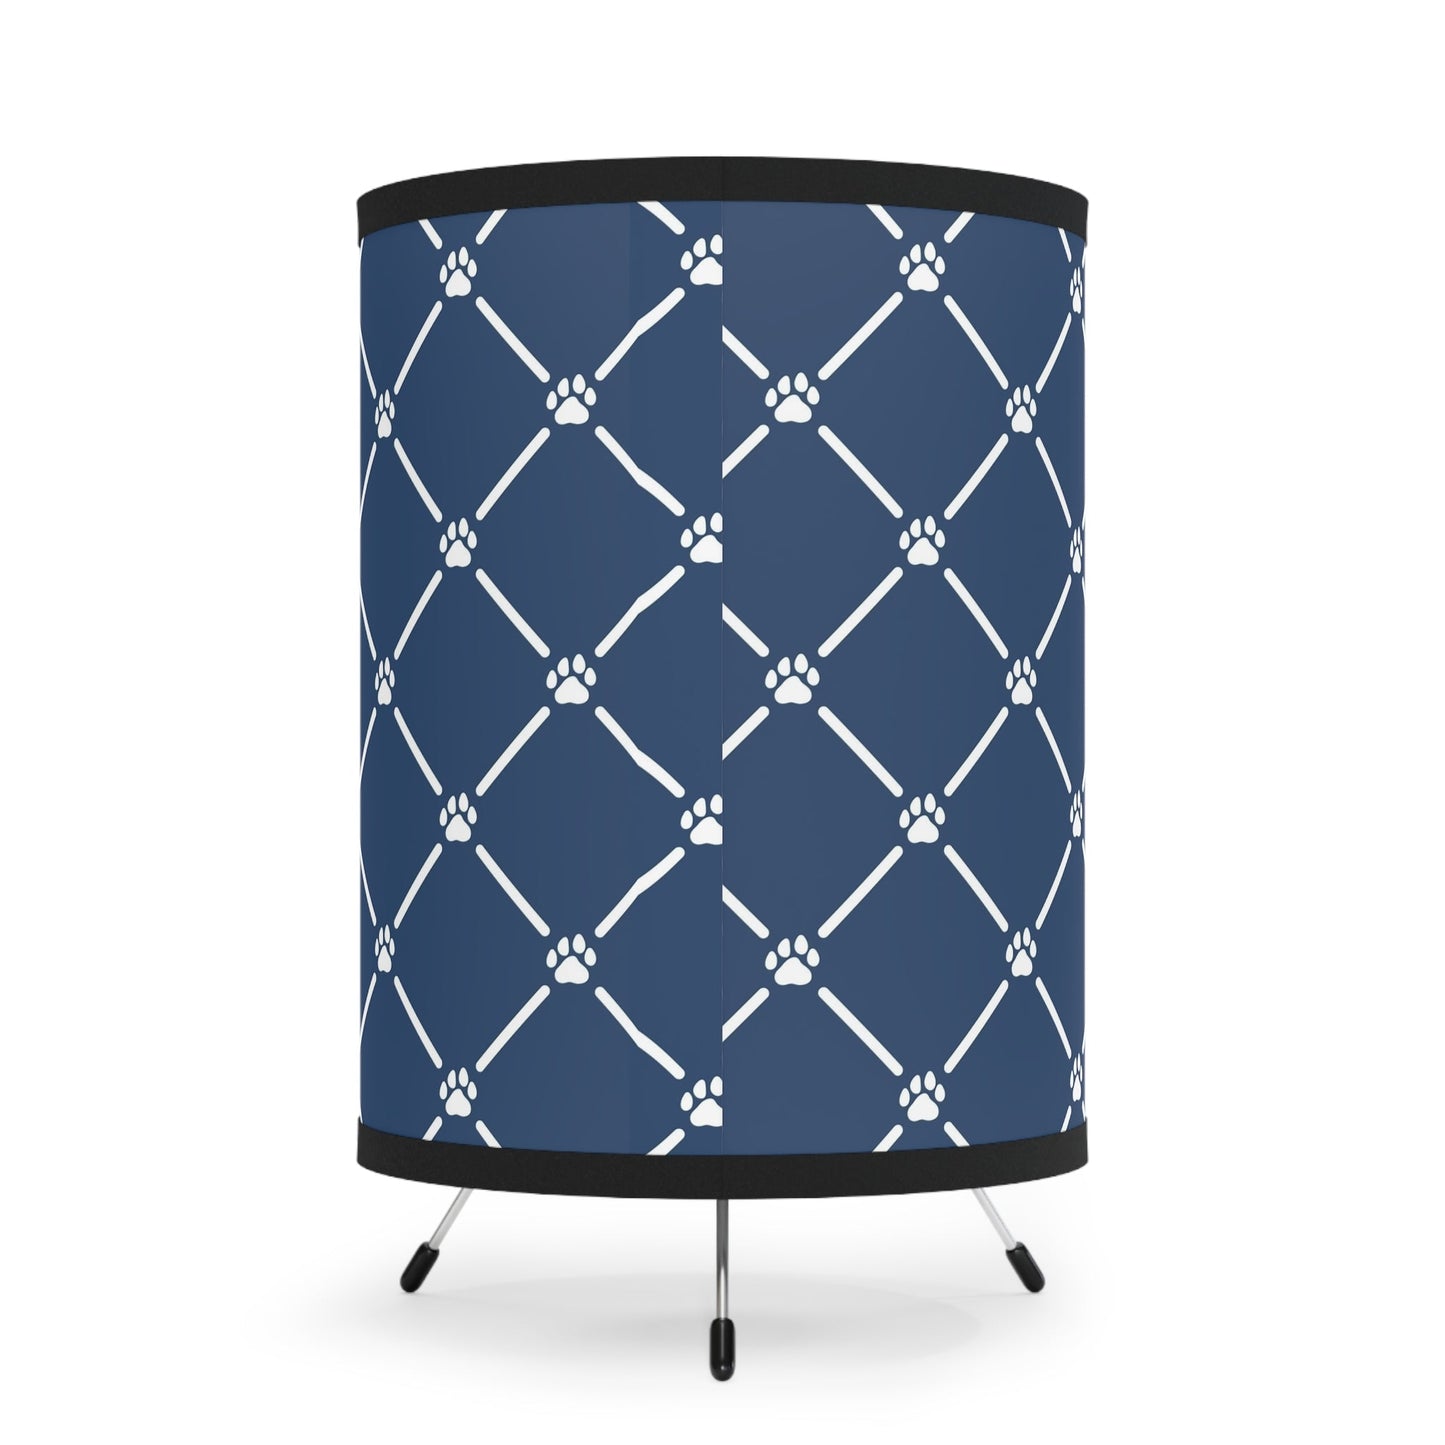 Blue & White Tripod Lamp with High - Res Printed Shade, US\CA plug - Home Decor - Epileptic Al’s Shop